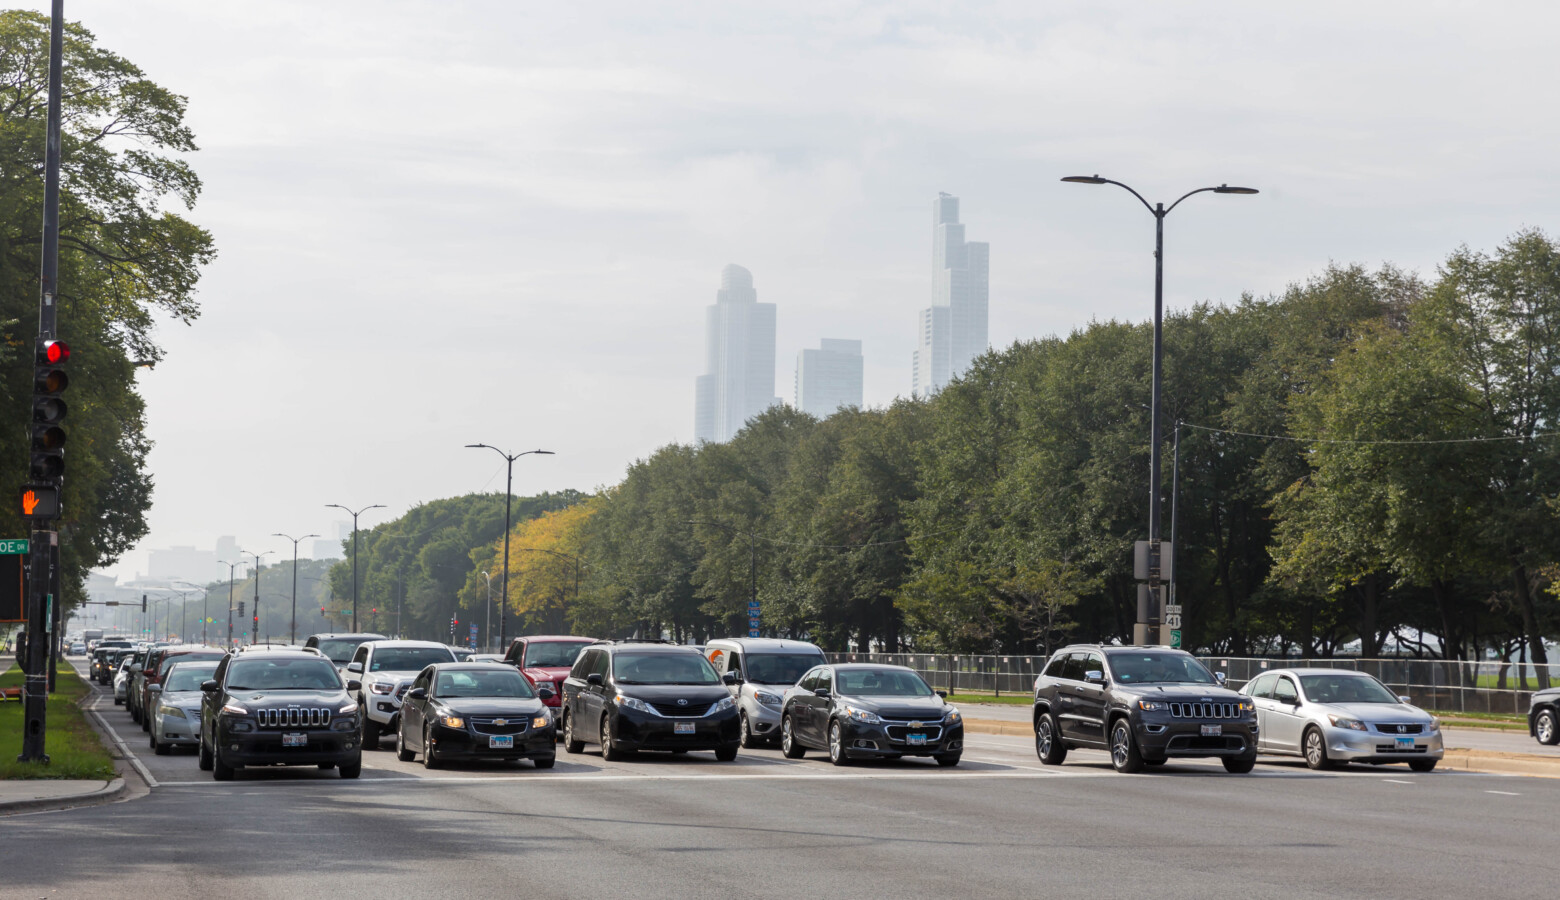 Chicago traffic at an intersection in 2019. The only four counties in Indiana that don't meet federal ozone standards are near major cities like Chicago. (Marco Verch/Flickr)